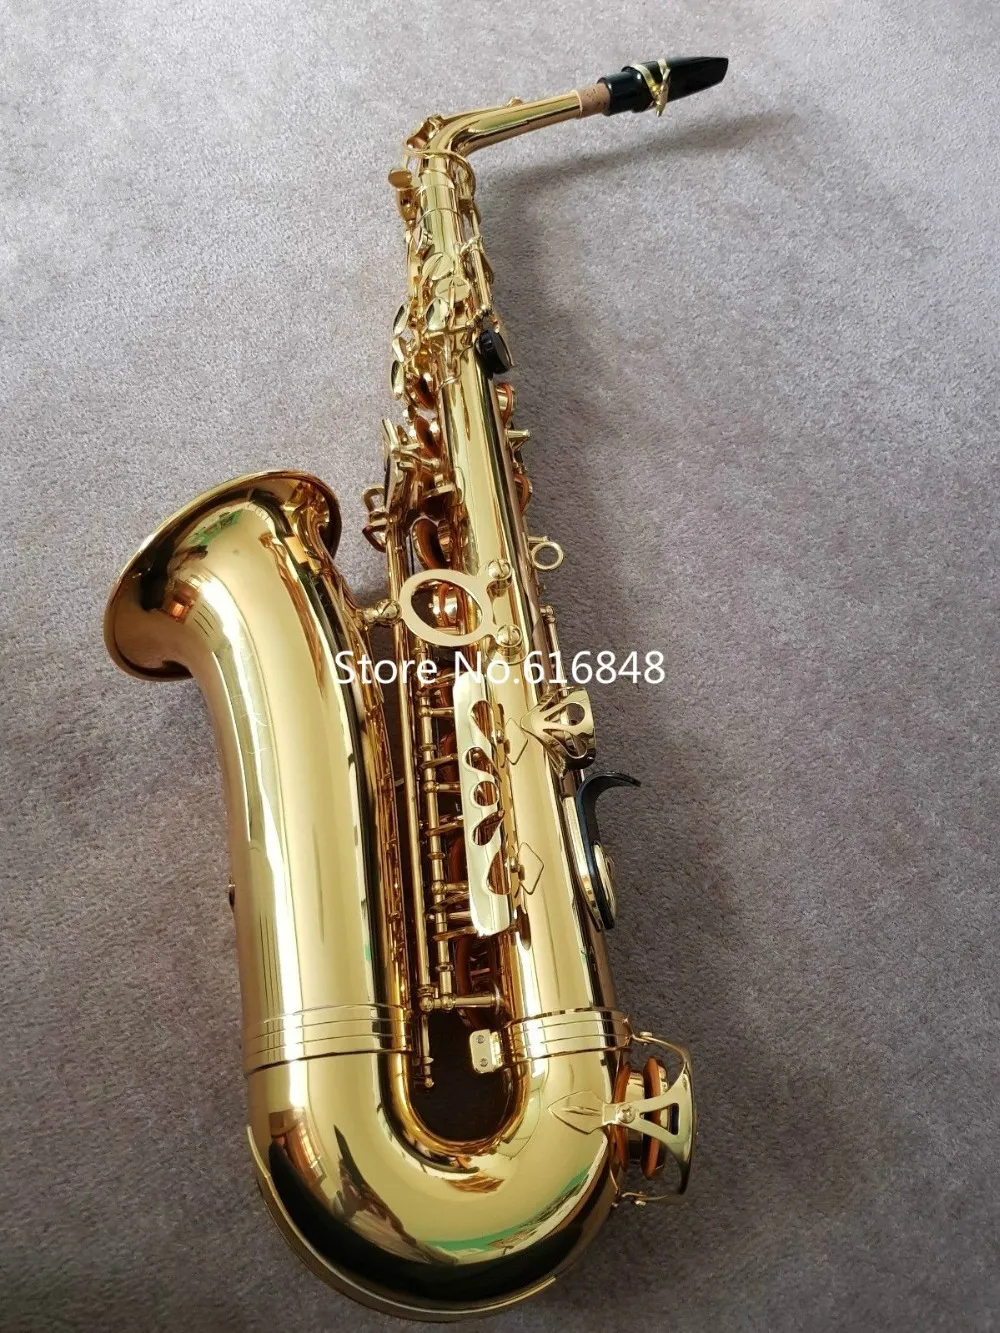 New Arrivel JUPITER JAS-767 High Quality Alto Eb Tone Brass Saxophone Gold Lacquer E-flat Tone Sax With Mouthpiece Case Gloves